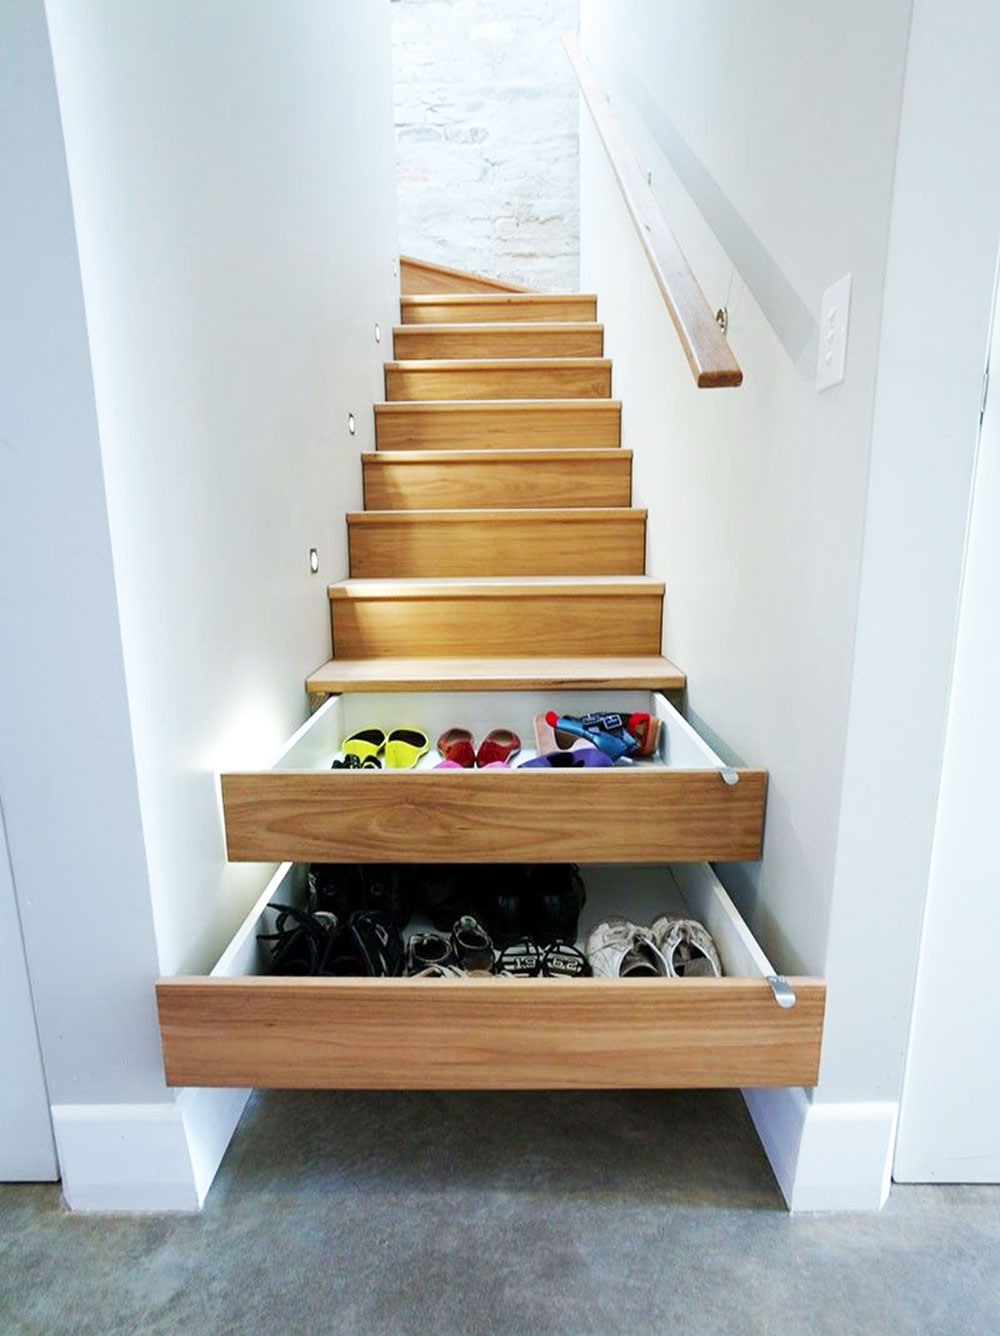 stairs How to hide a safe: Best place to place it in your house